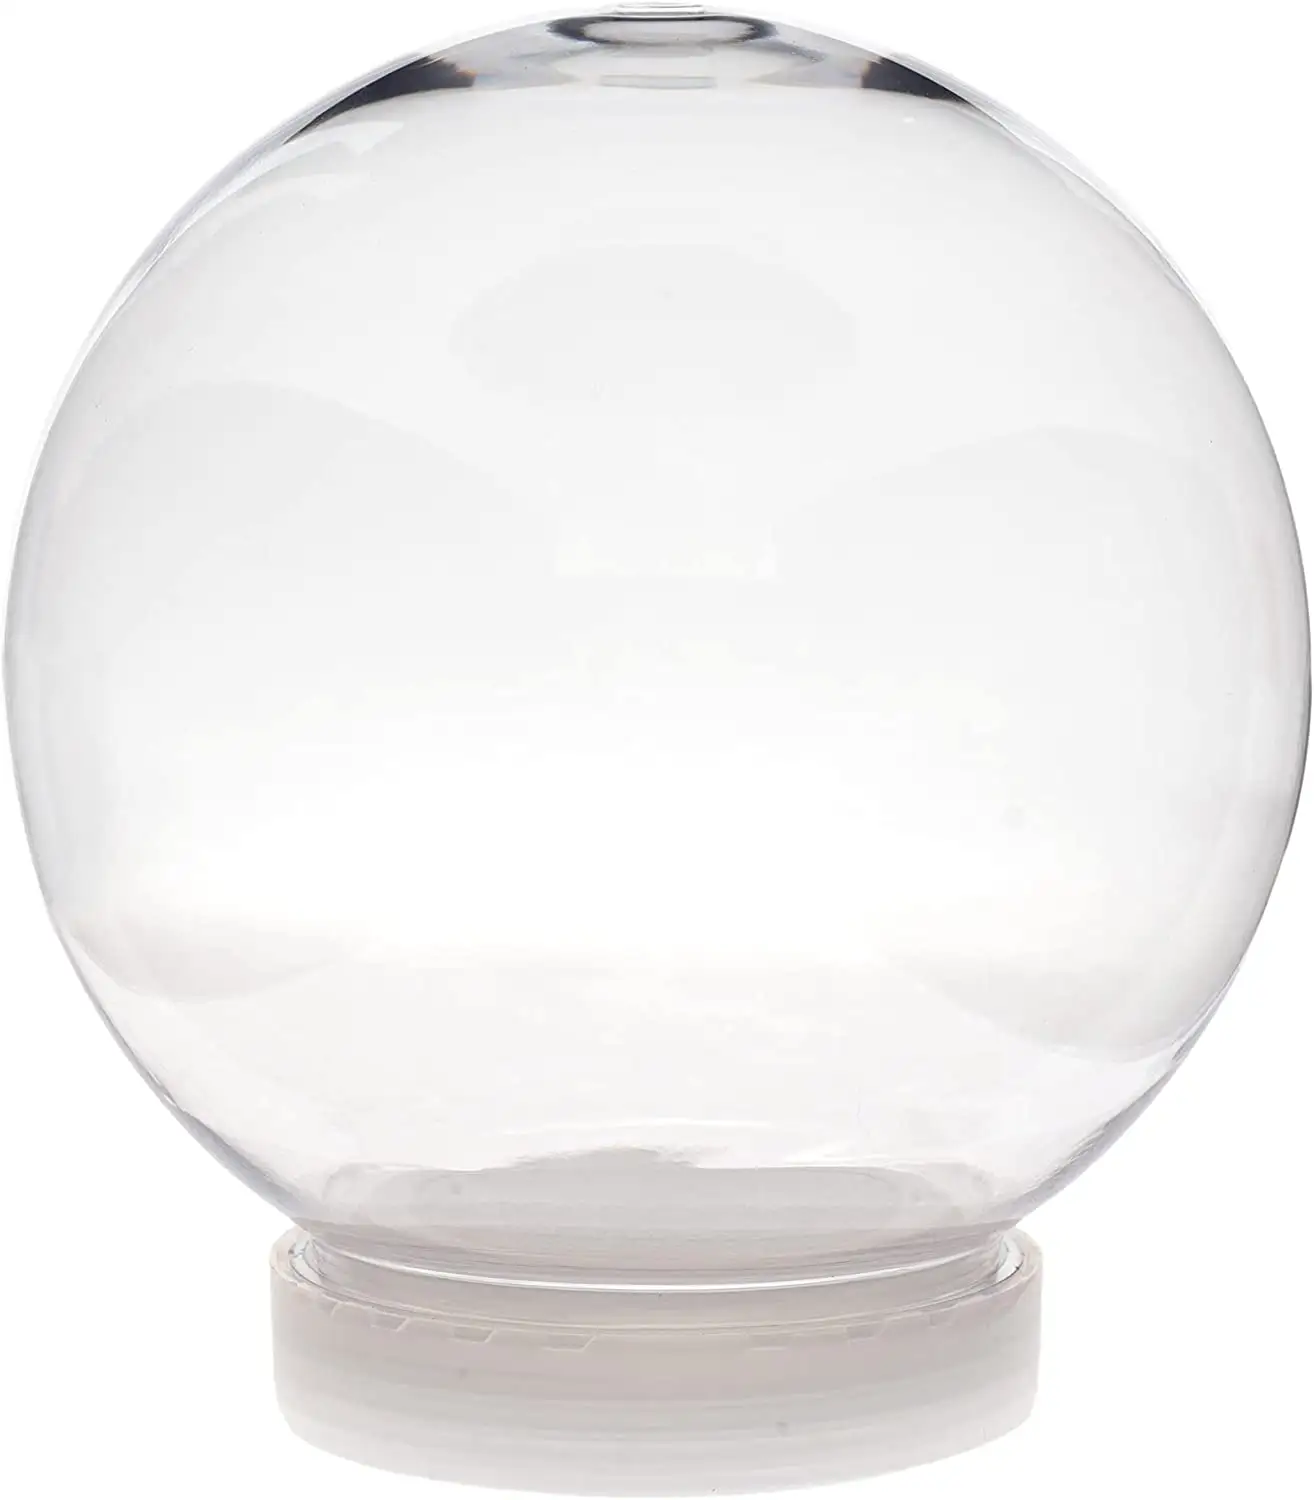 DIY Snow Globe Water Globe, Clear Plastic with Screw Off Great for DIY Crafts